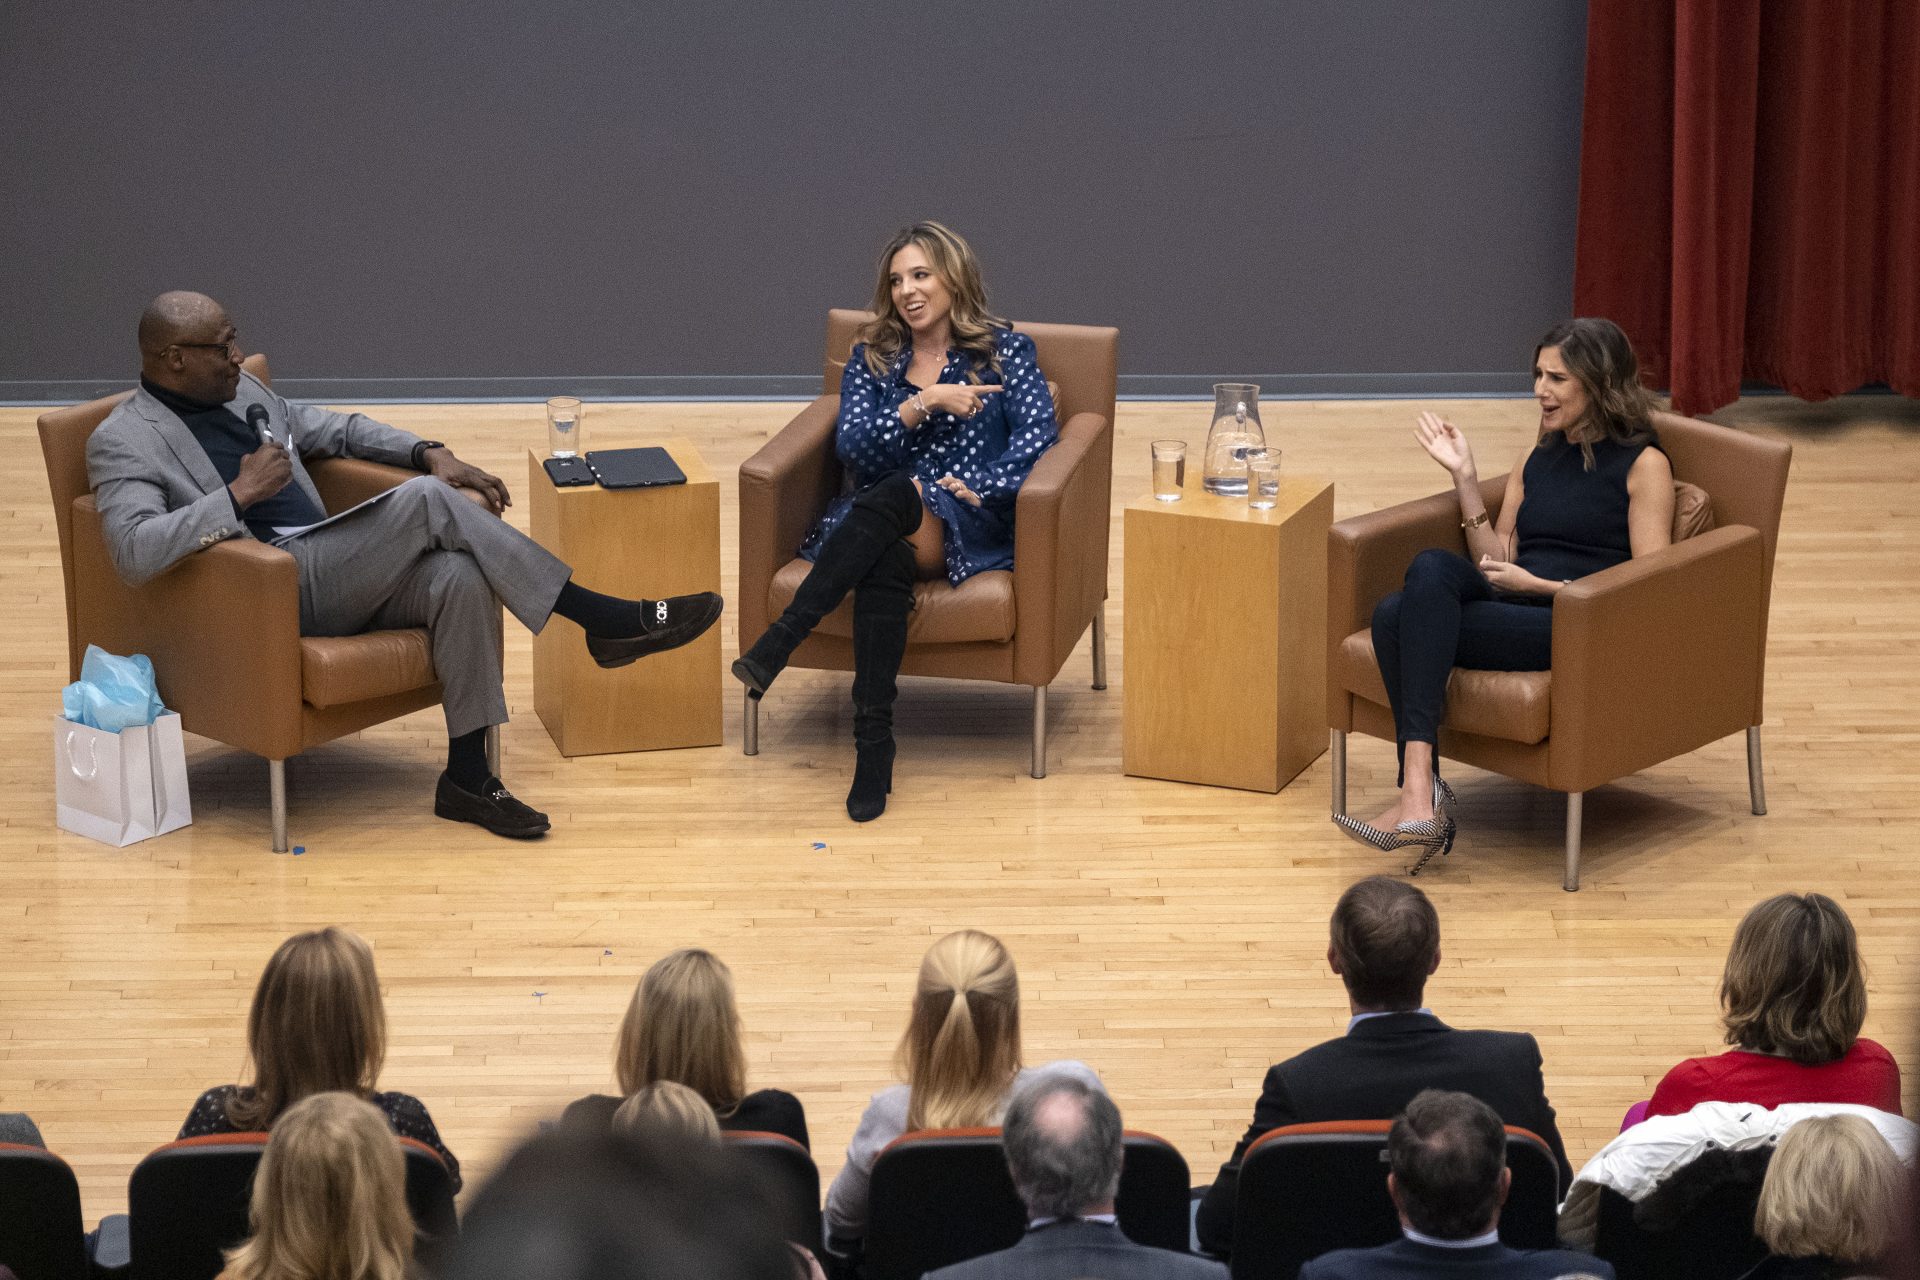 This year, the Shuford Program hosted a talk that featured the founders of the popular e-news source The Skimm